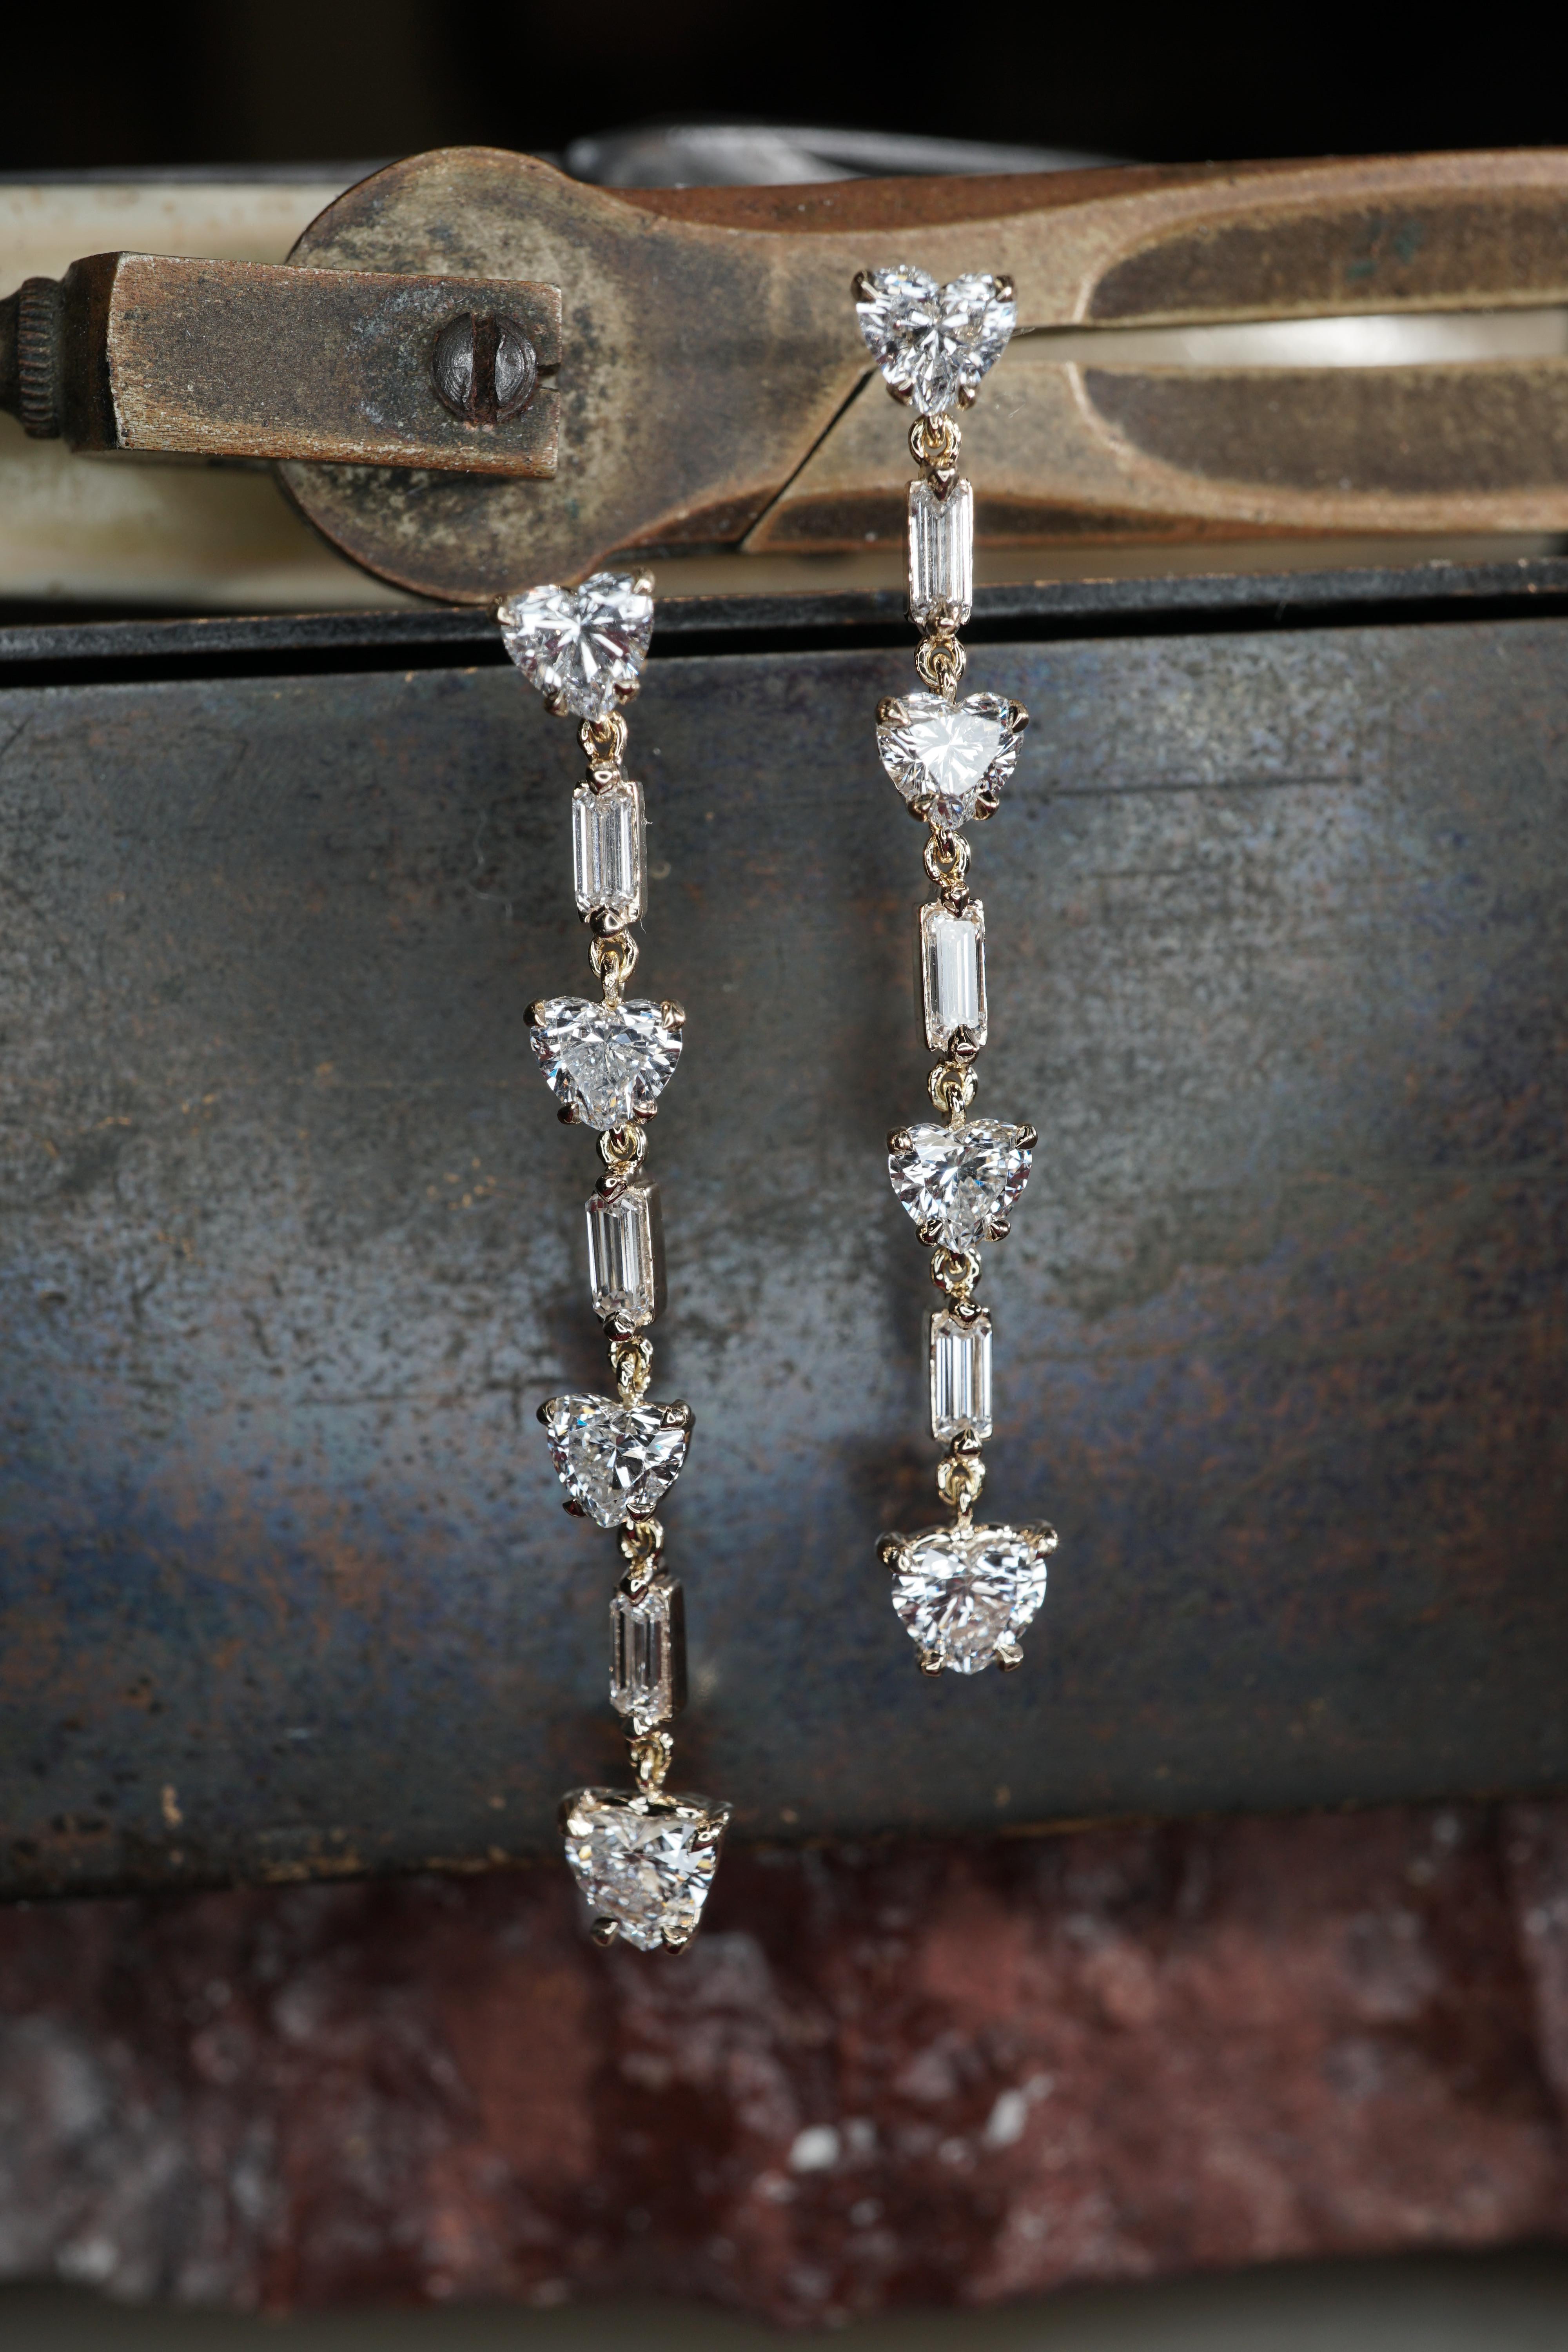 Alternating heart and emerald cut diamonds drop dangling earrings, 1.80 carats total weight. These earrings are set in 4 prong basket in 14K Yellow Gold.

This piece can be customized with any metal, diamonds, and stone shape and size. The